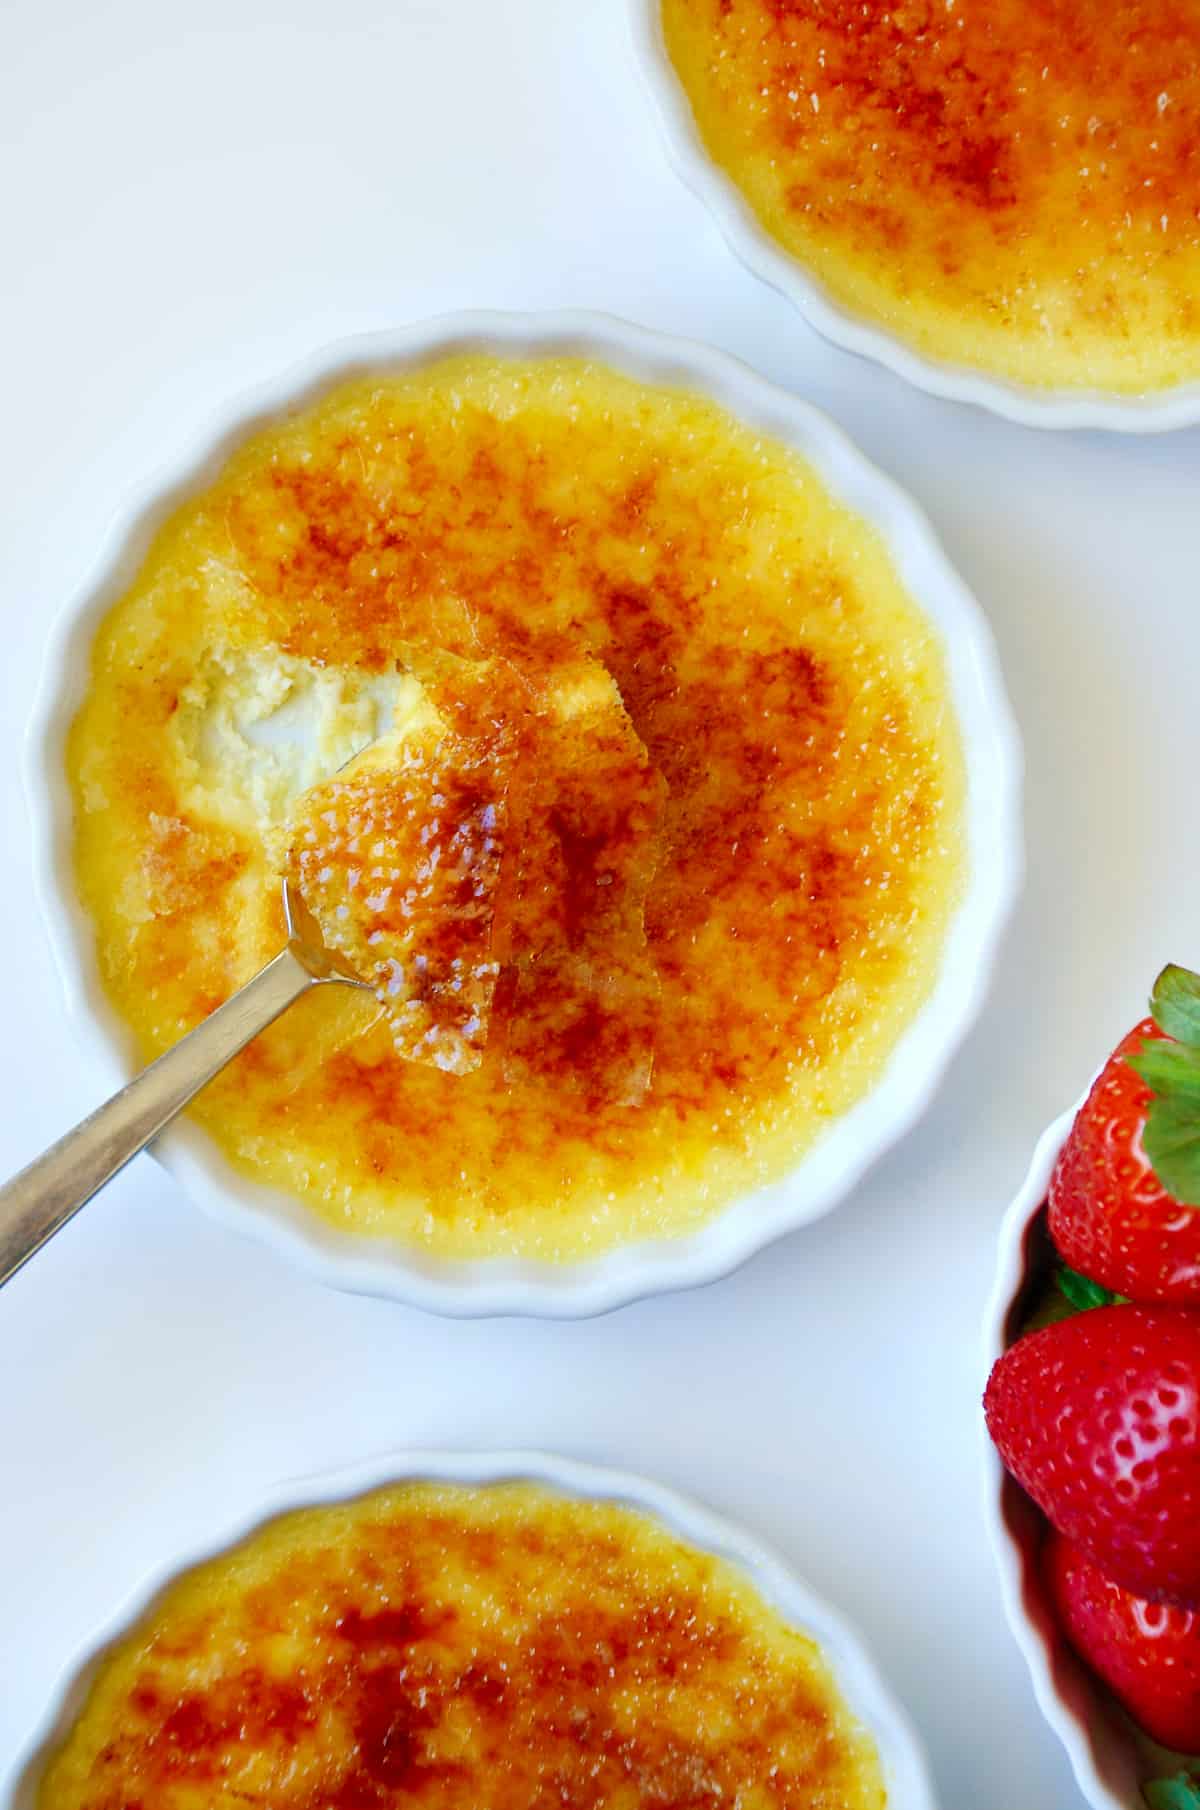 A crème brûlée cheesecake in a white tart dish next to a bowl of strawberries.